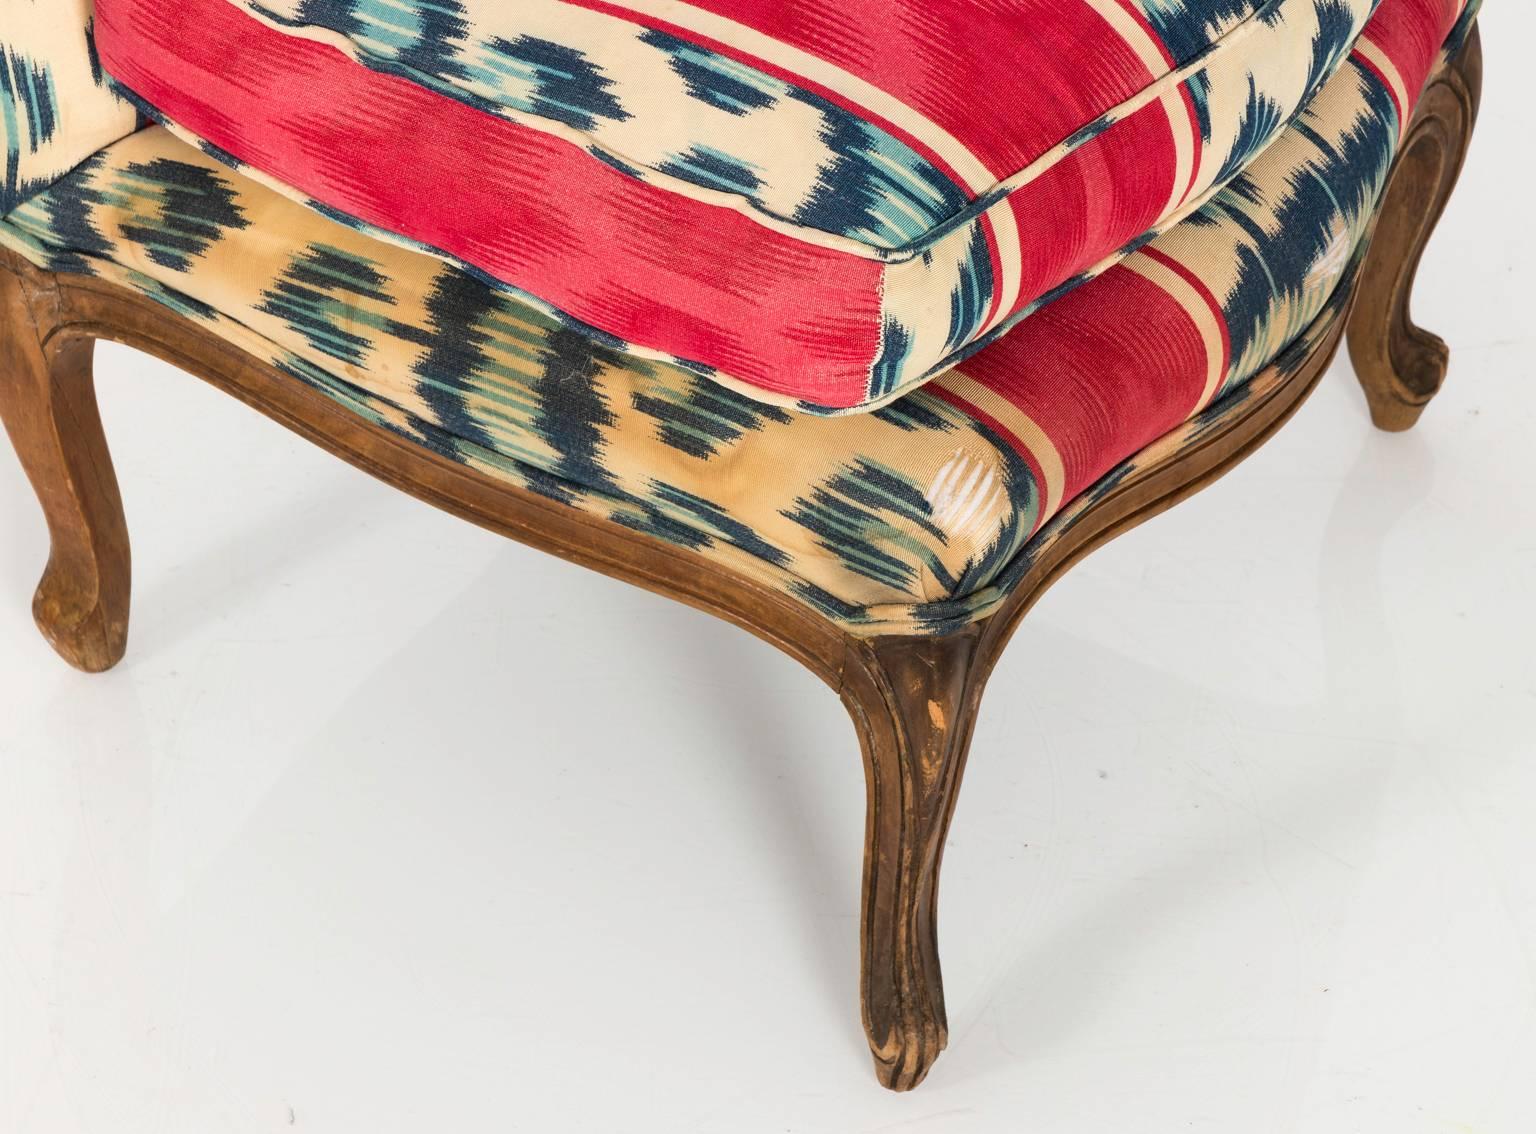 Louis XVI style slipper chairs in a vintage custom fabric, circa early 20th century.